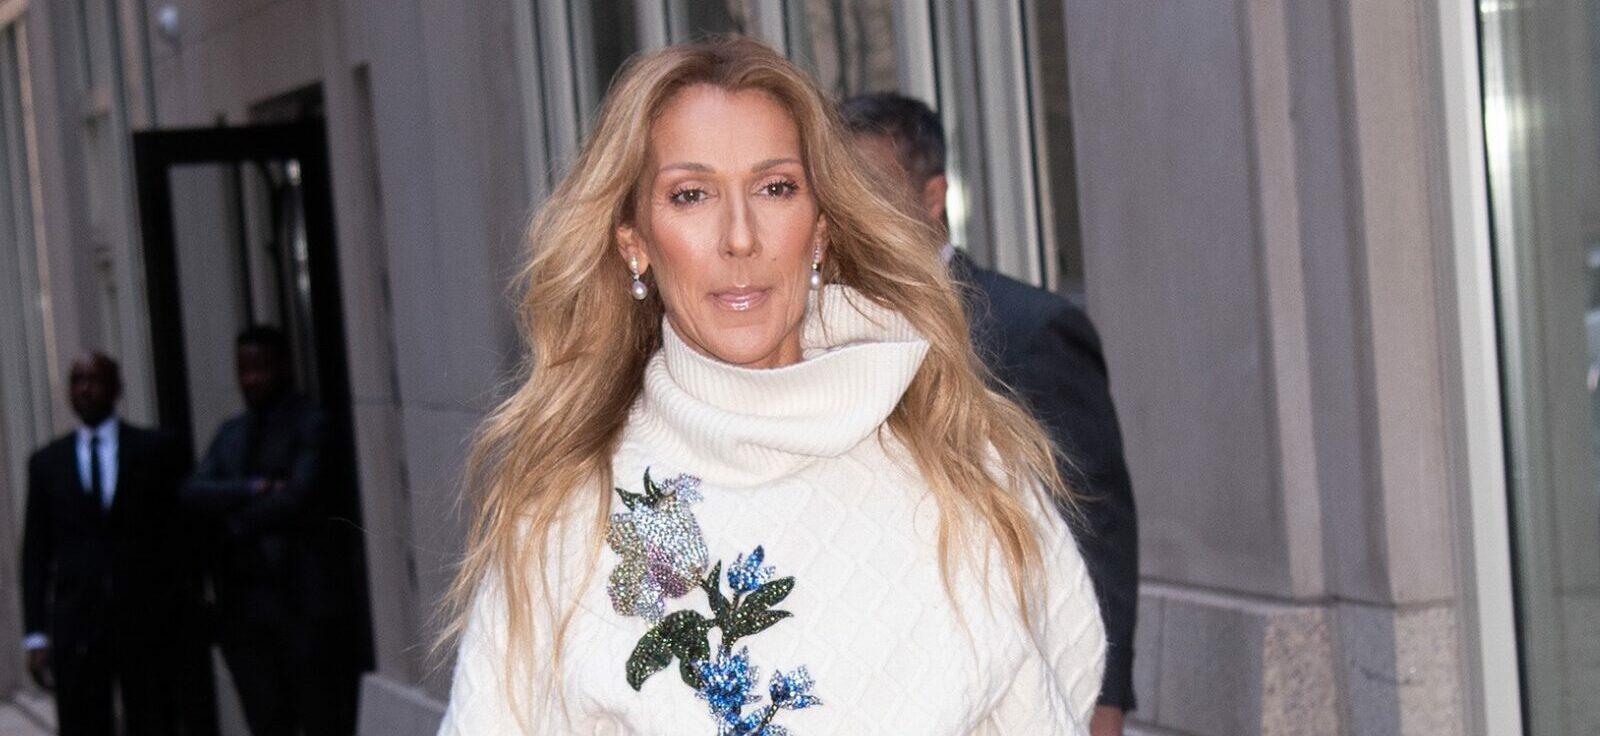 Celine Dion Departs Hotel in NYC in a Flowered Dress